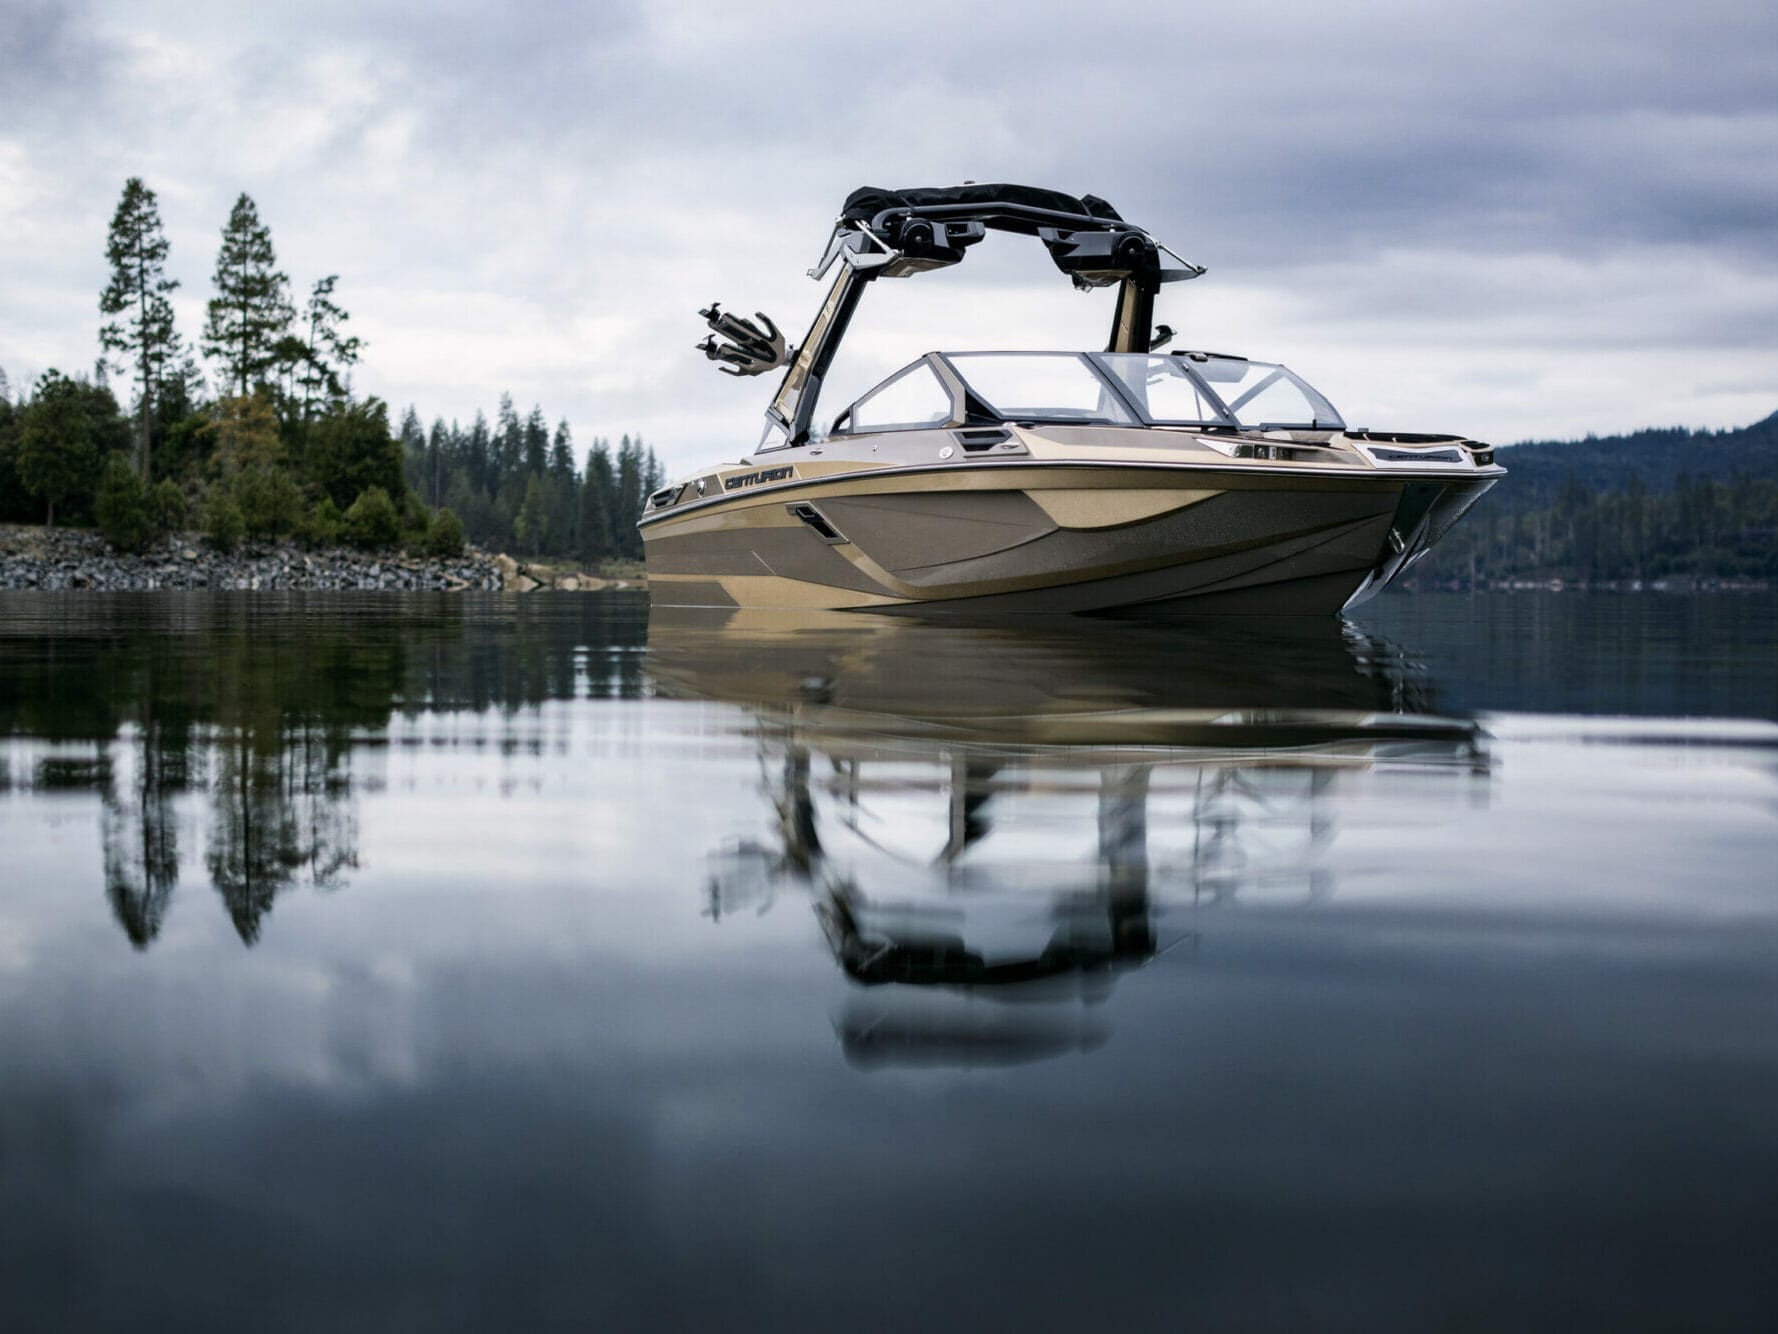 A wakesurf boat is floating on a lake.